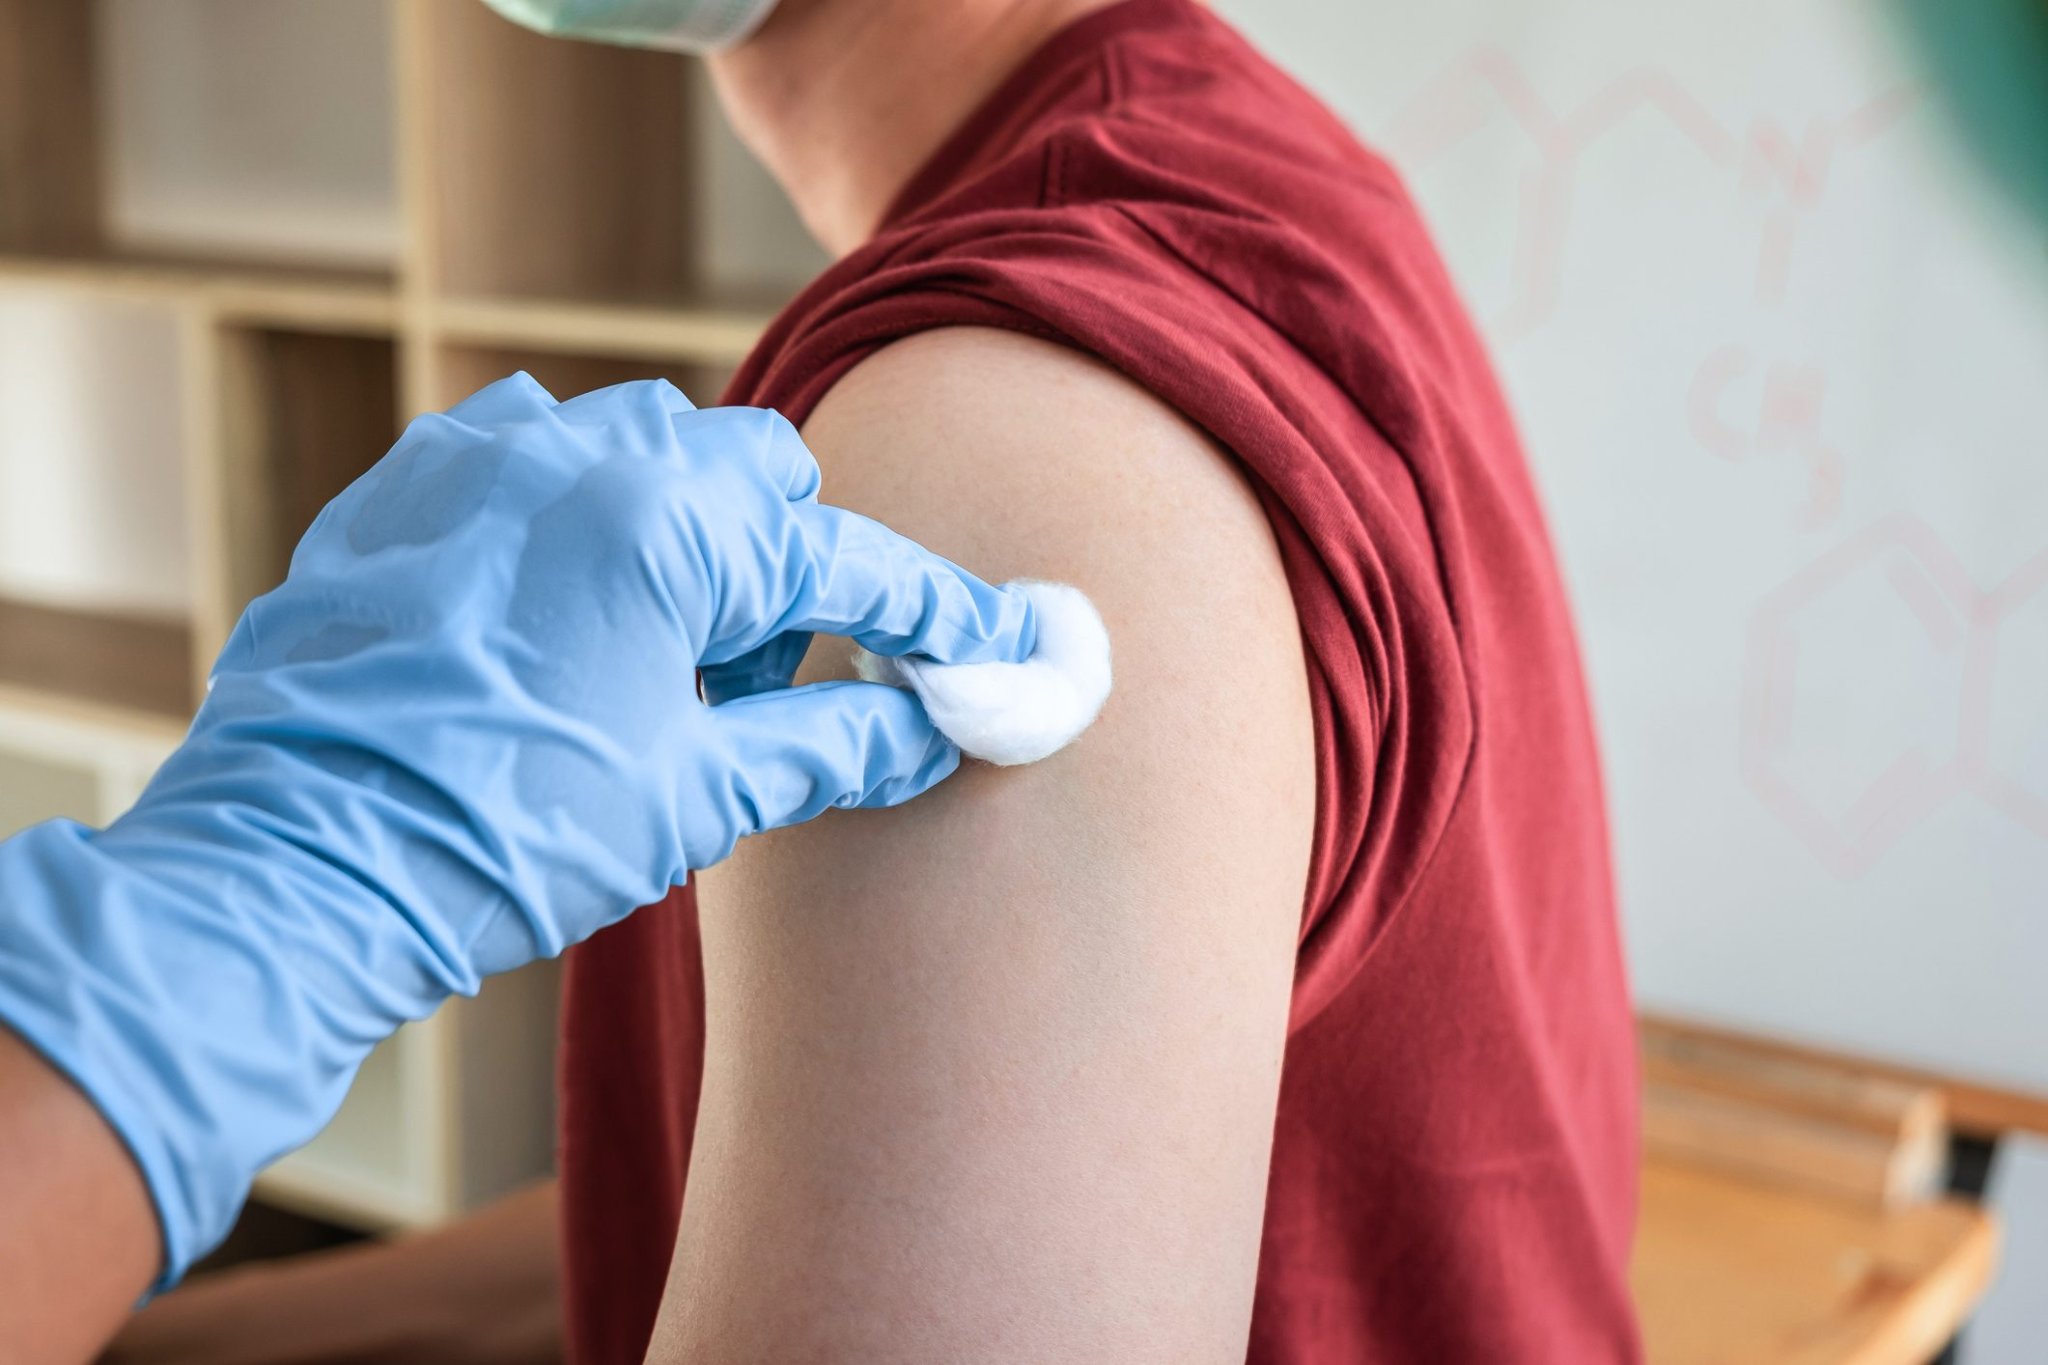 Doctors Say Knowing About This Vaccine Could Cut Your Cancer Risk Significantly